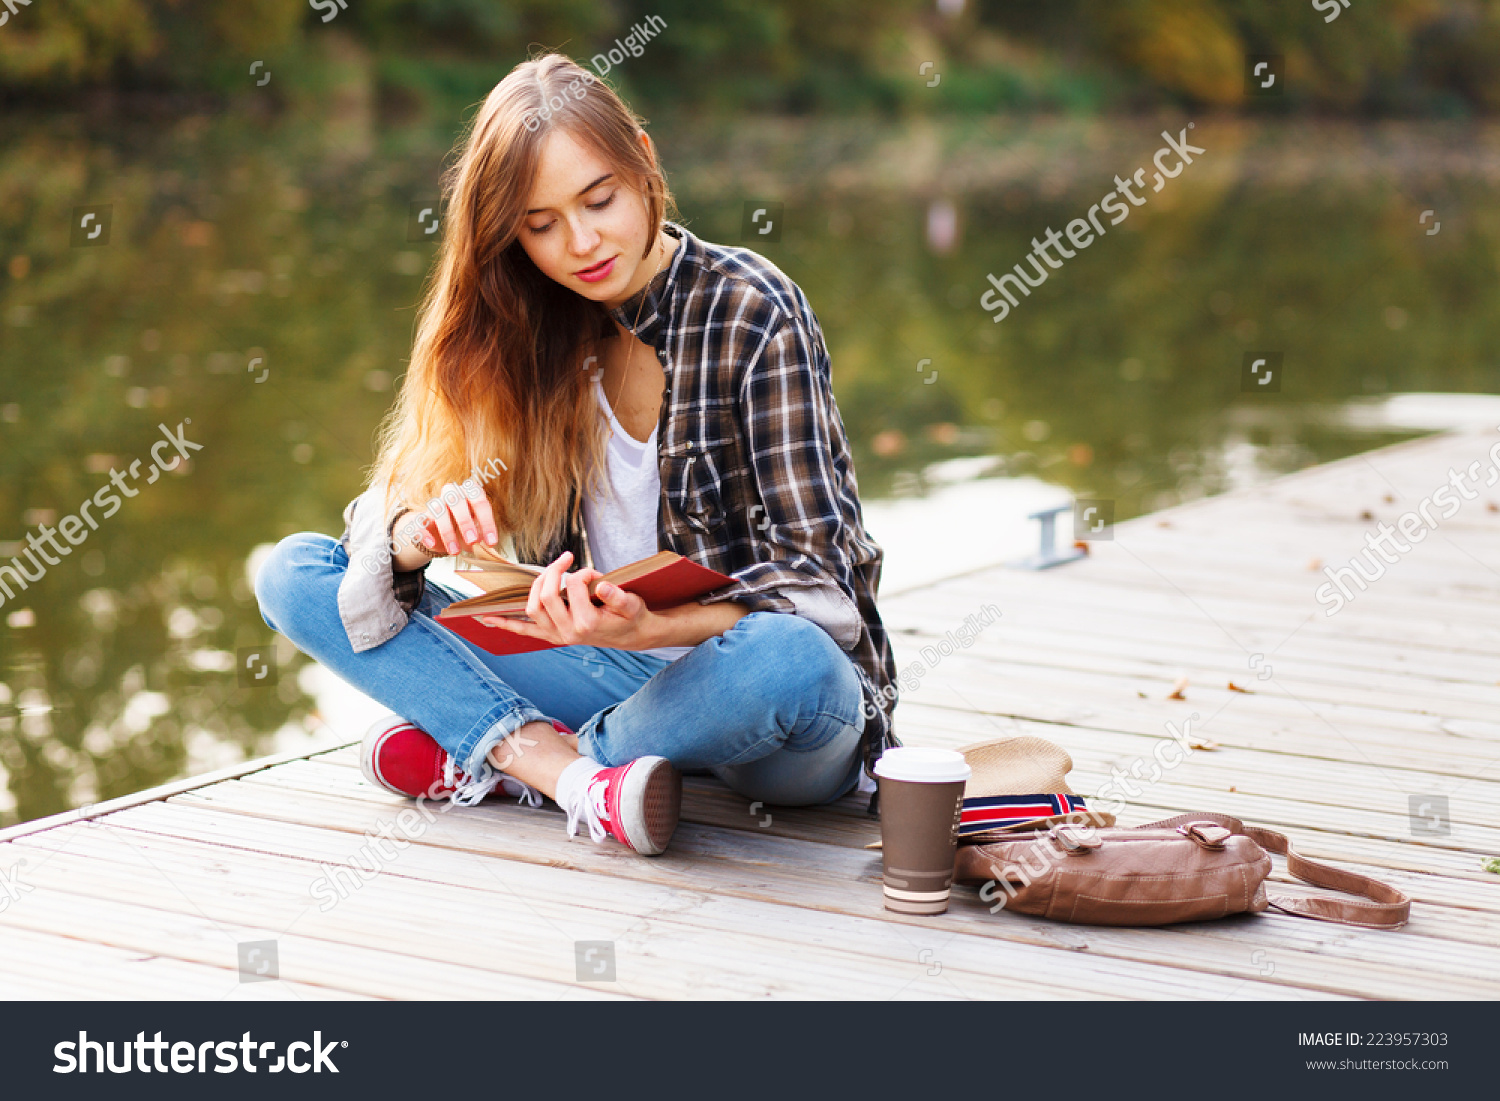 Young beautiful girl sitting on a pier #223957303